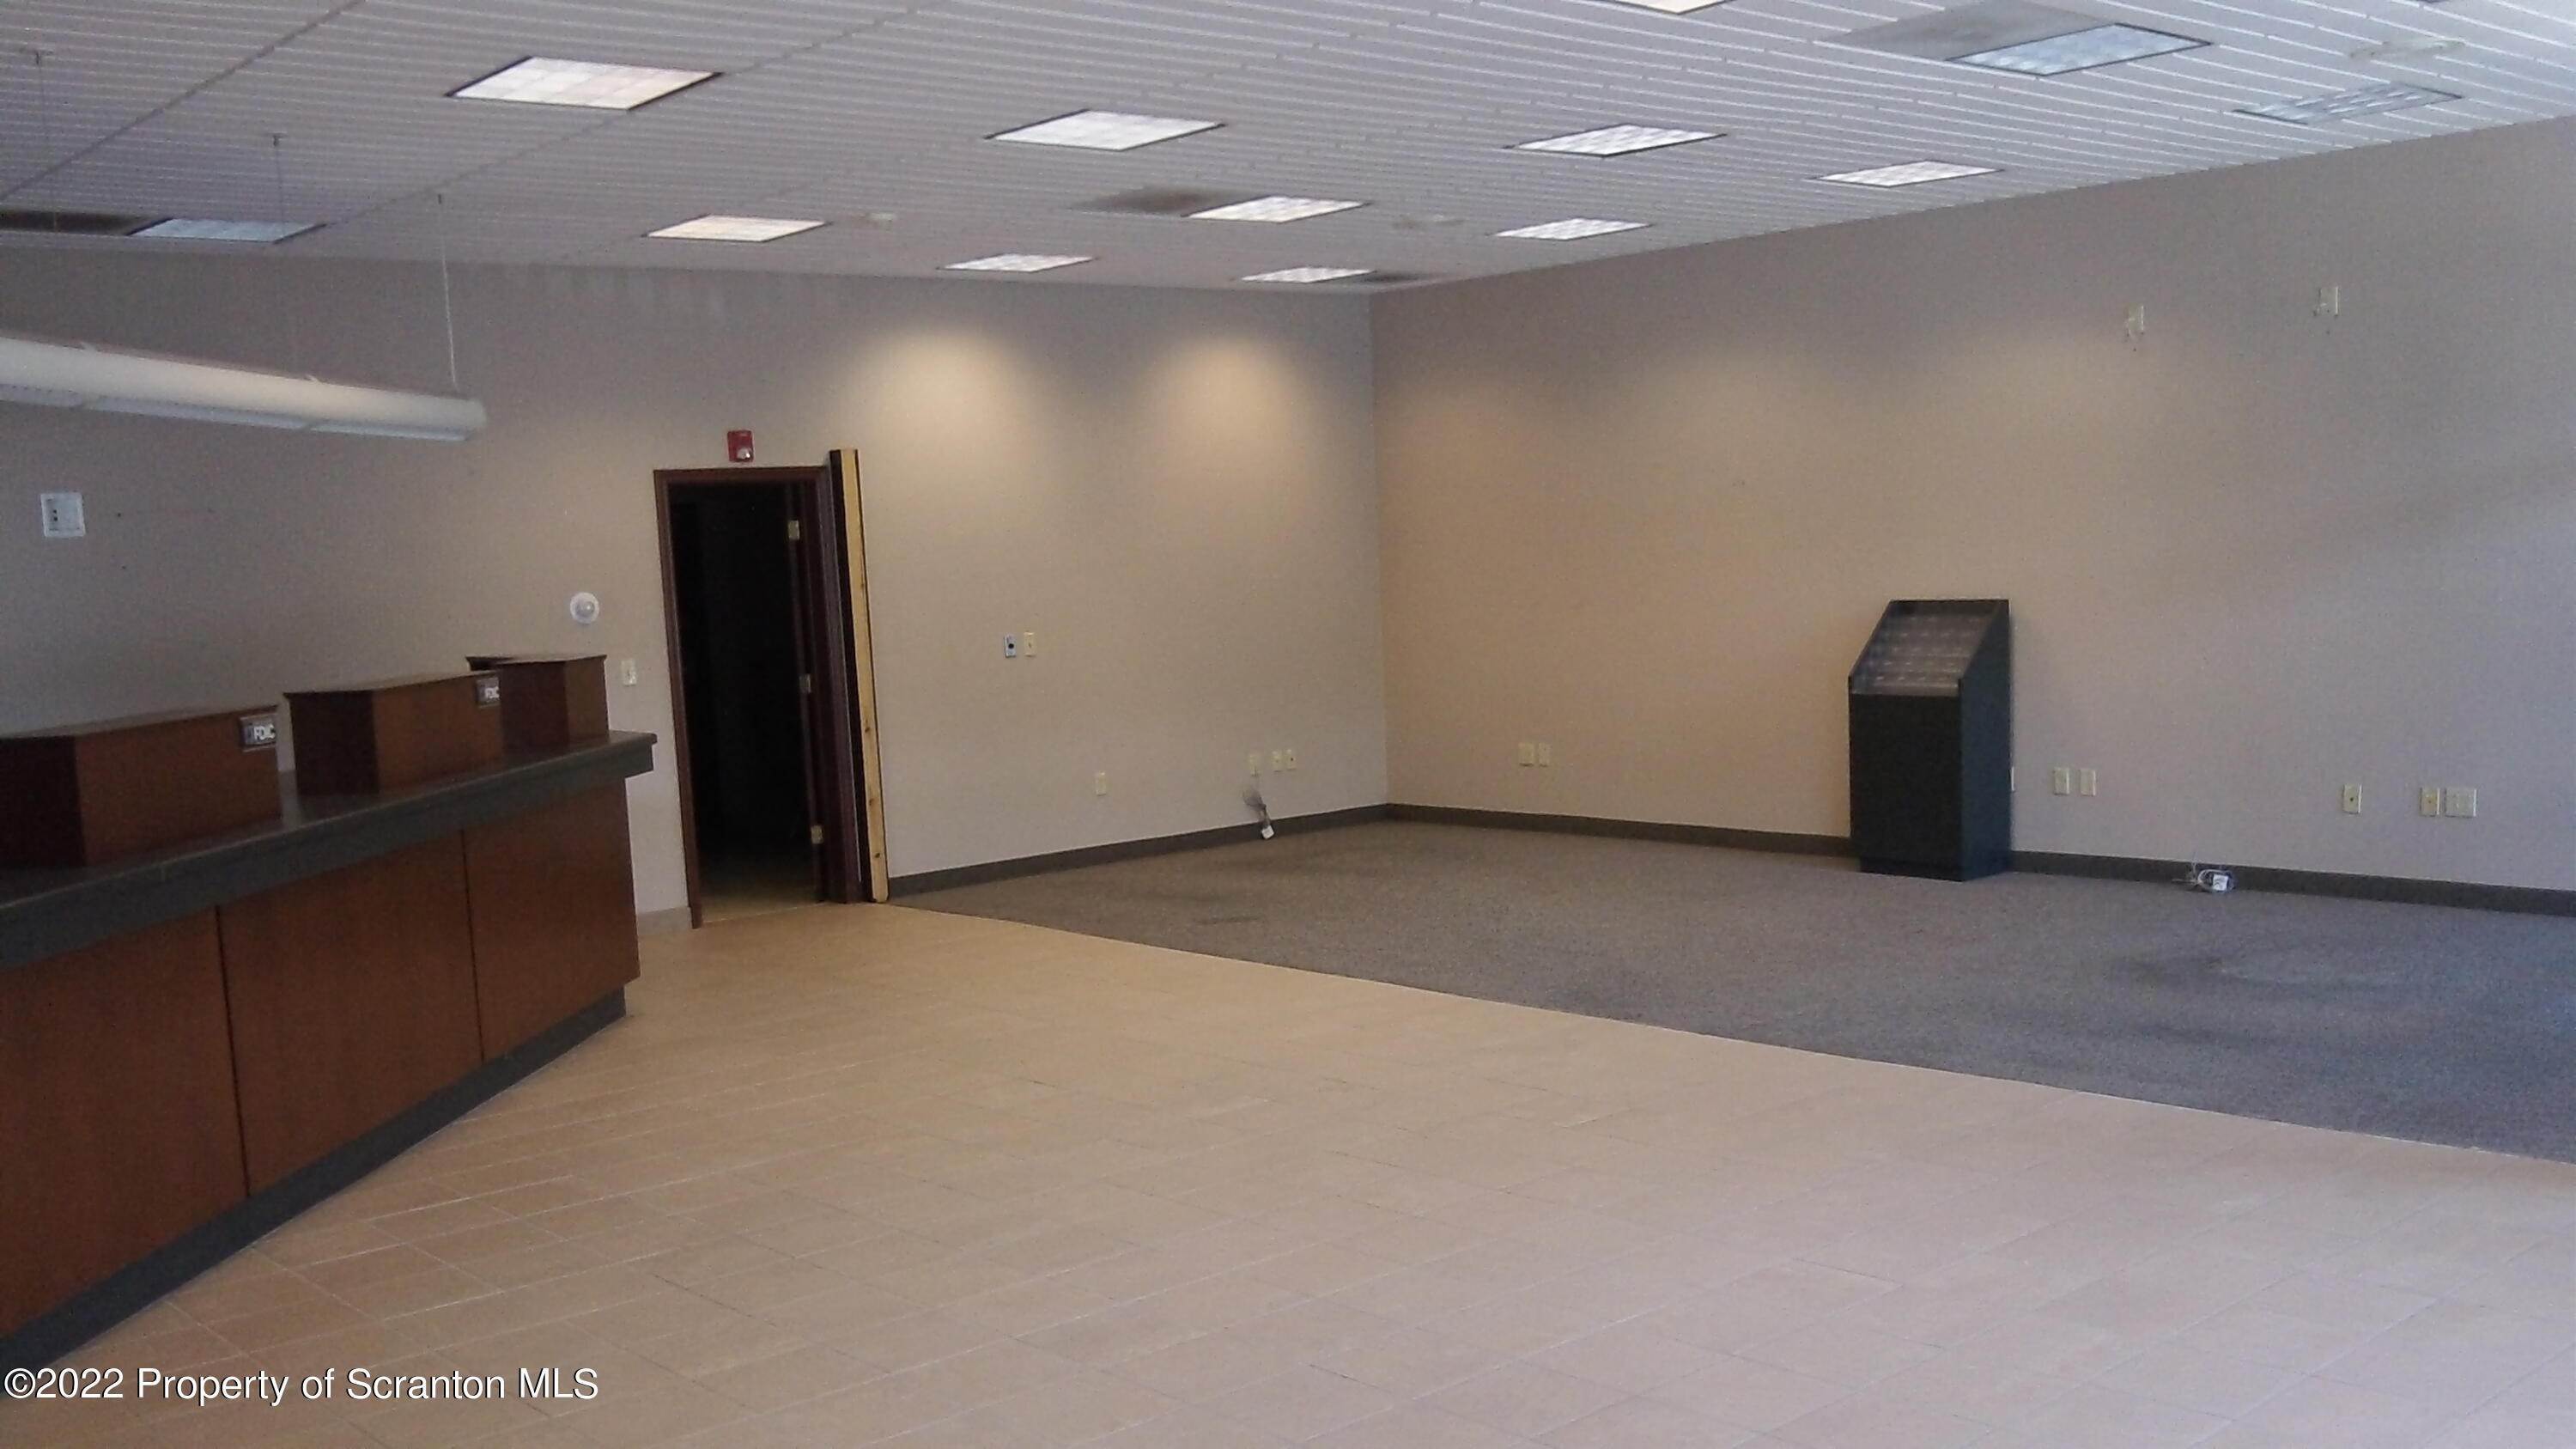 5. Commercial for Rent at 515 Scranton Carbondale Hwy Archbald, Pennsylvania 18403 United States